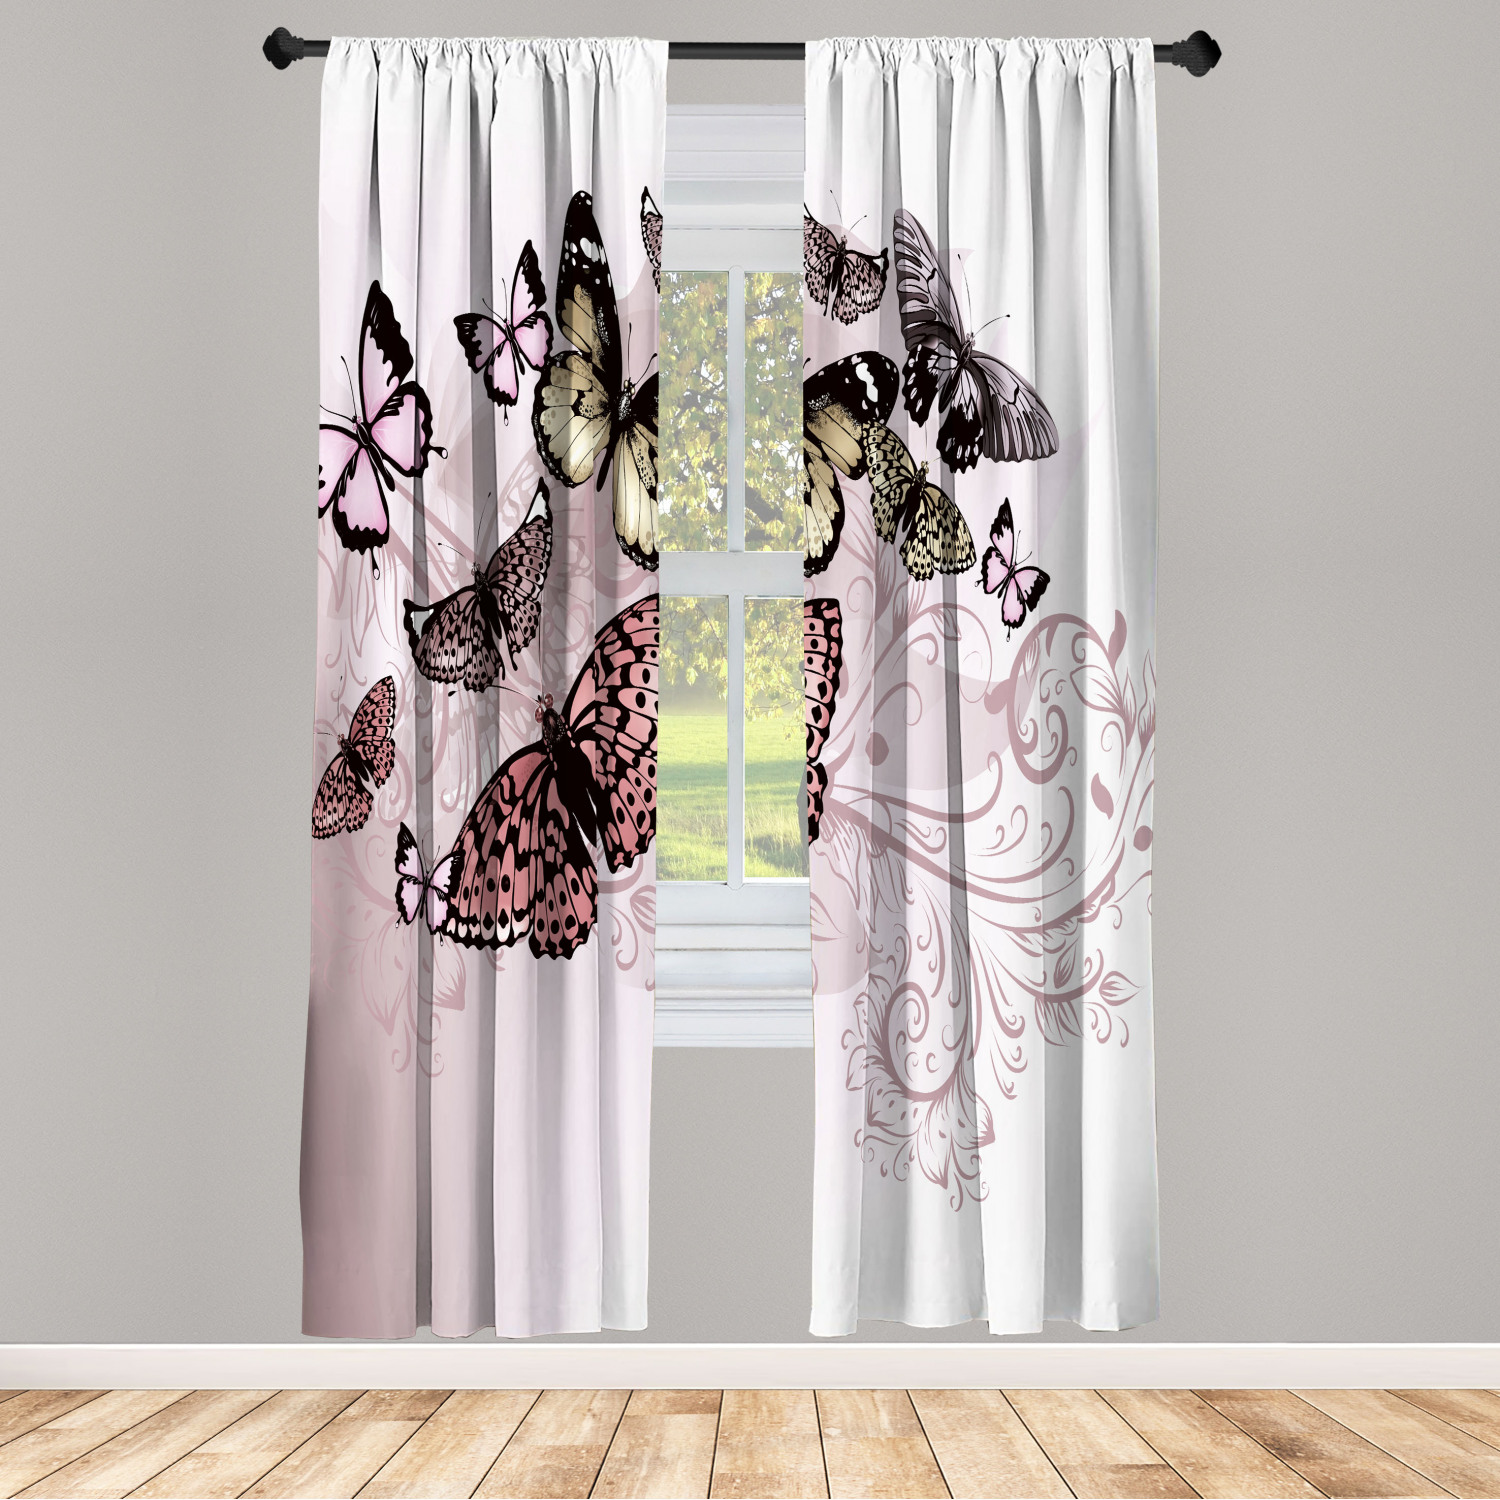 Butterfly Window Curtains, Monarch Butterflies Vintage Damask Inspired ...